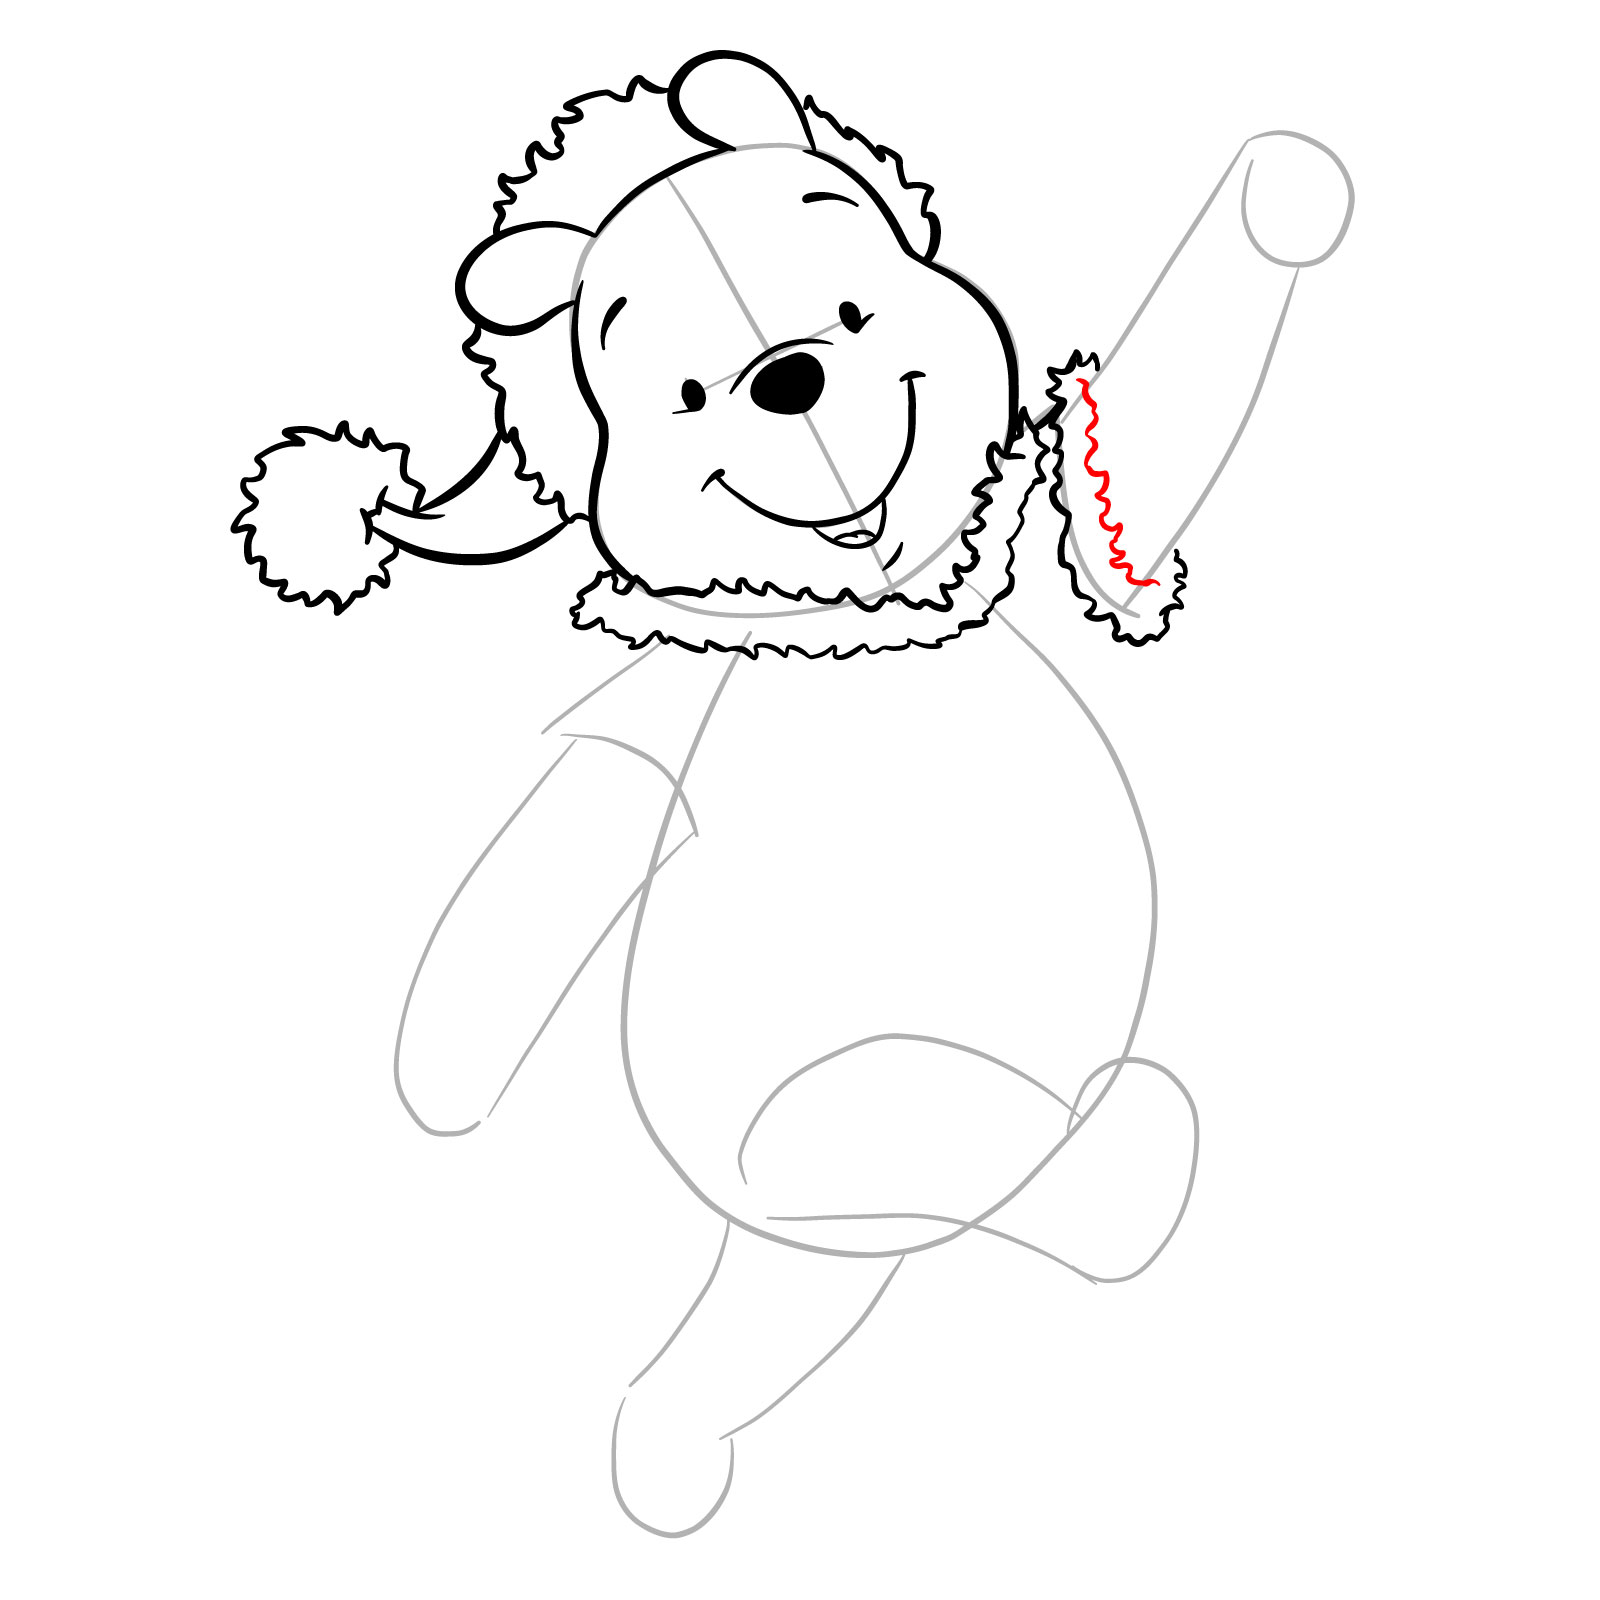 How to draw Winnie-the-Pooh Christmas style - step 16